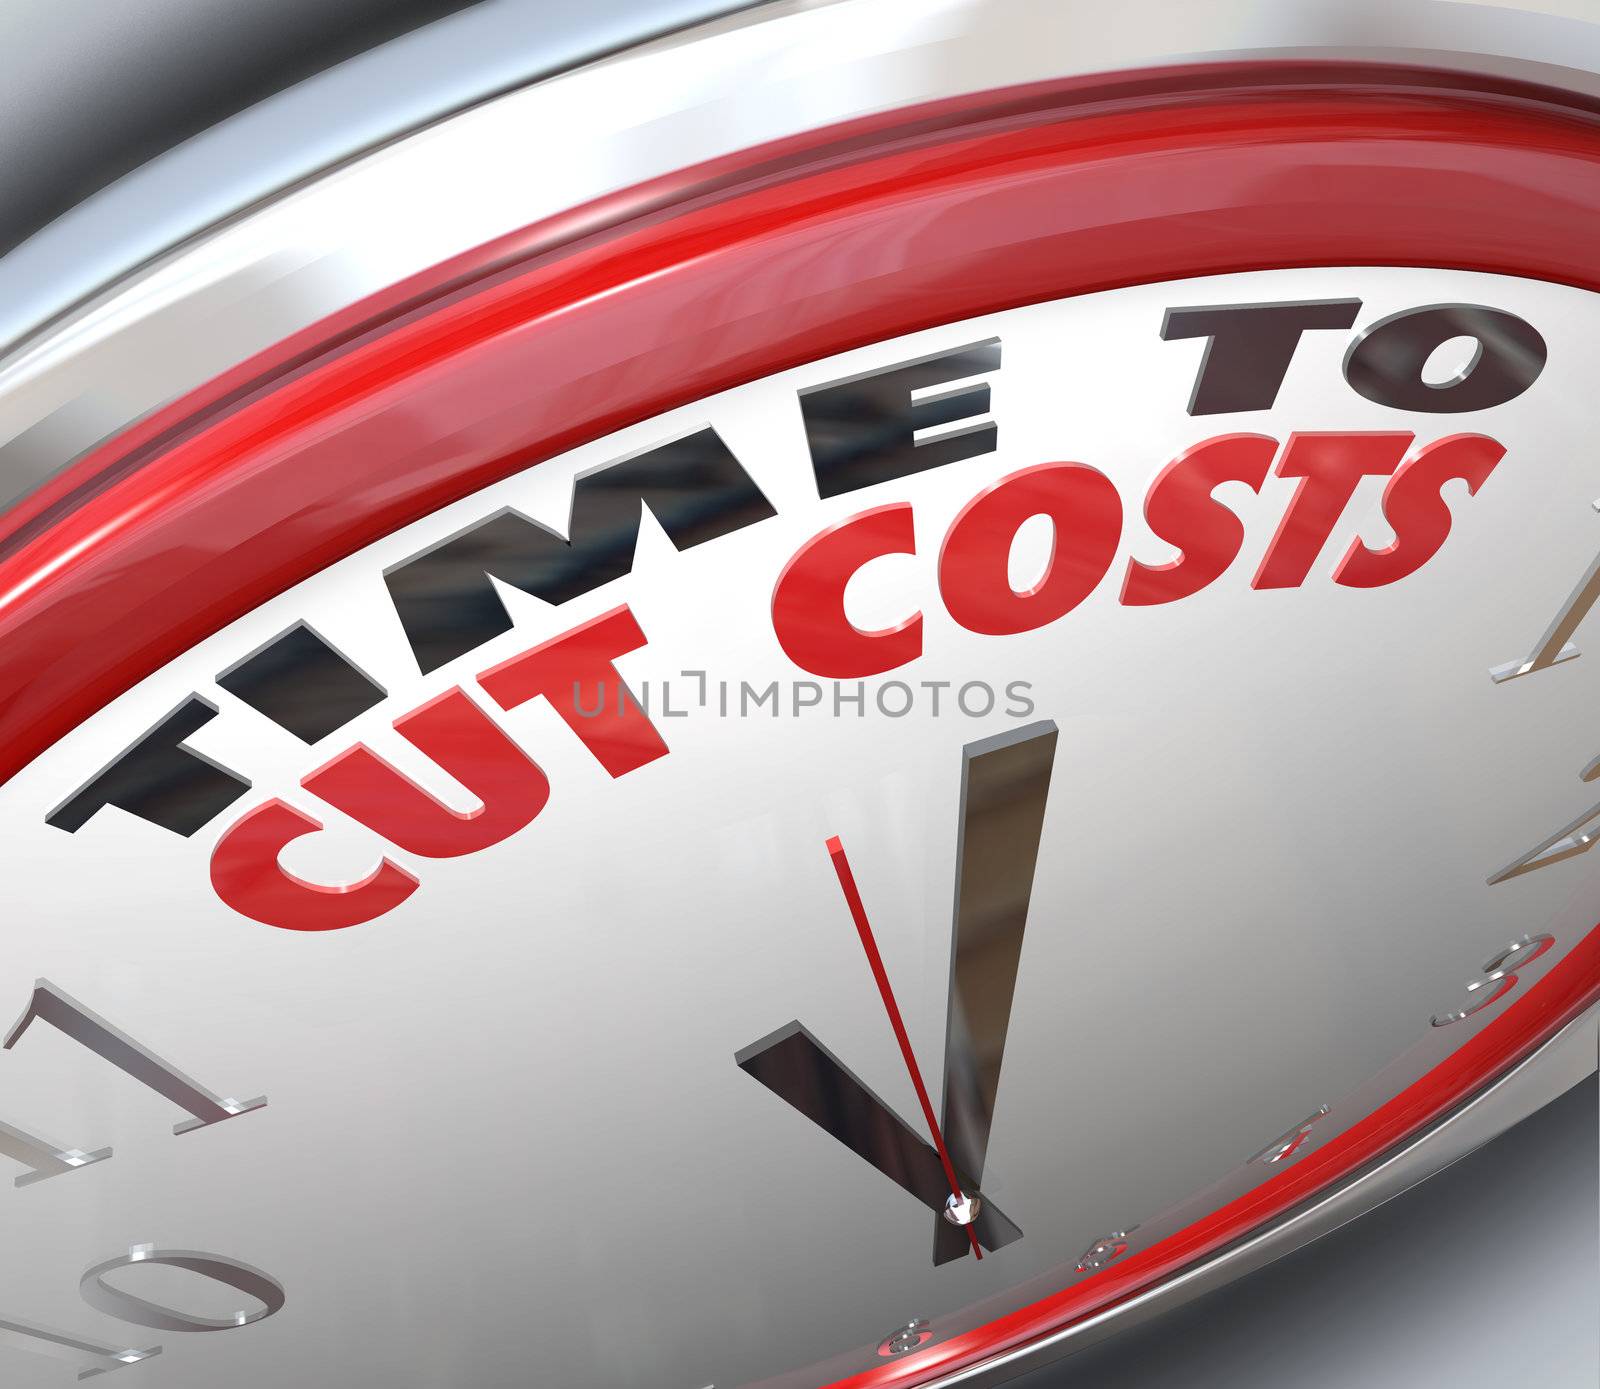 Watch your spending and reduce your overhead by paying attention to this clock telling you it is Time to Cut Costs and get your budget in order before you are in debt or bankrupt